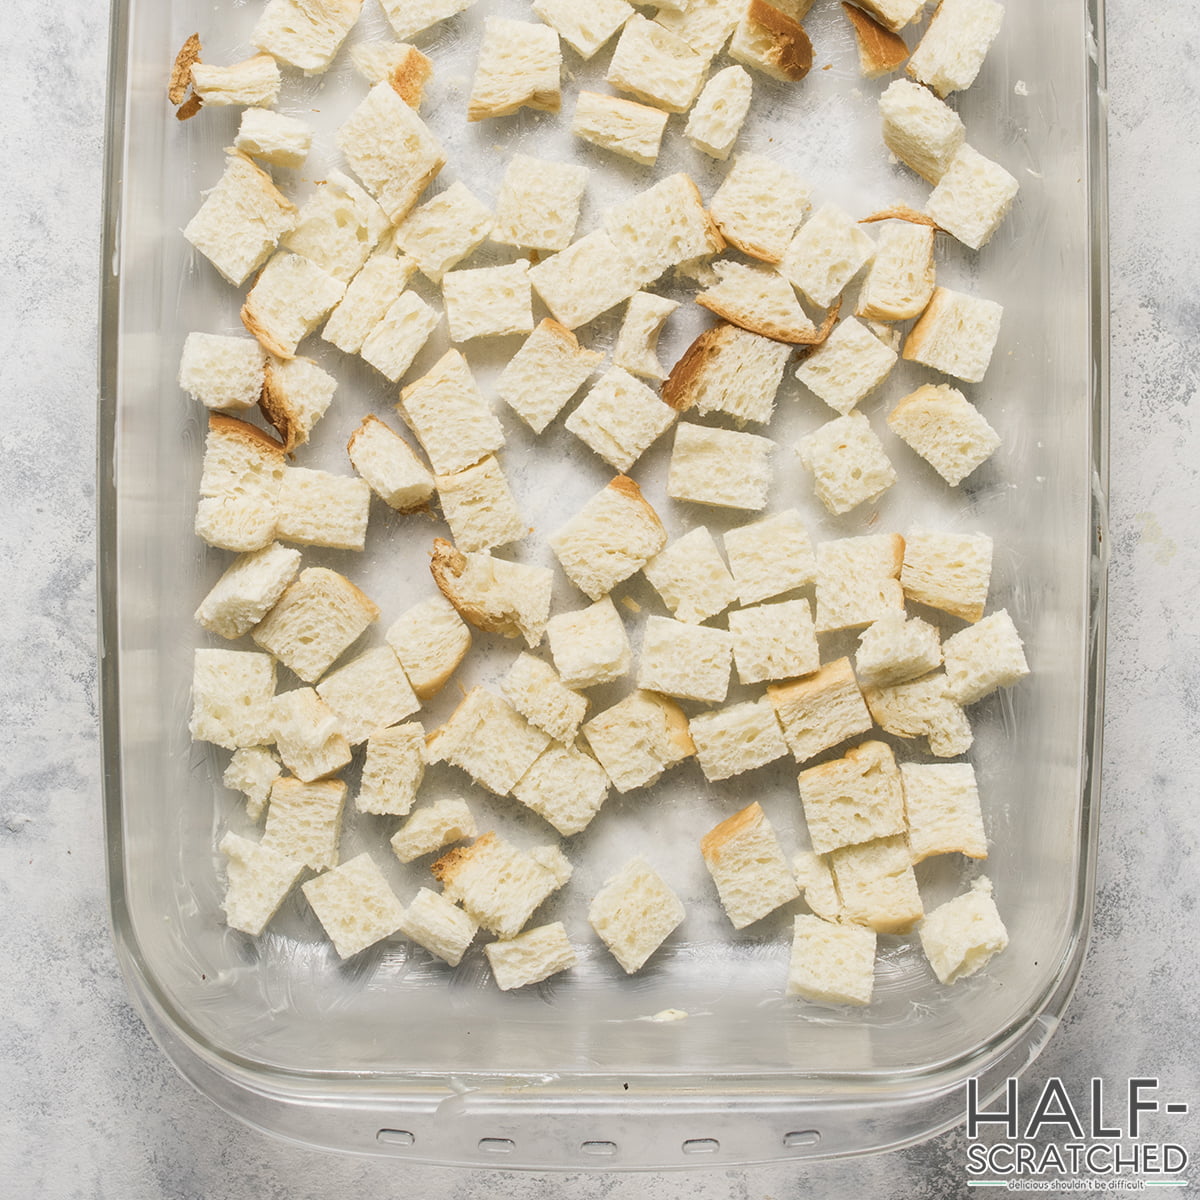 Pieces of bread cut into cubes in a baking dish